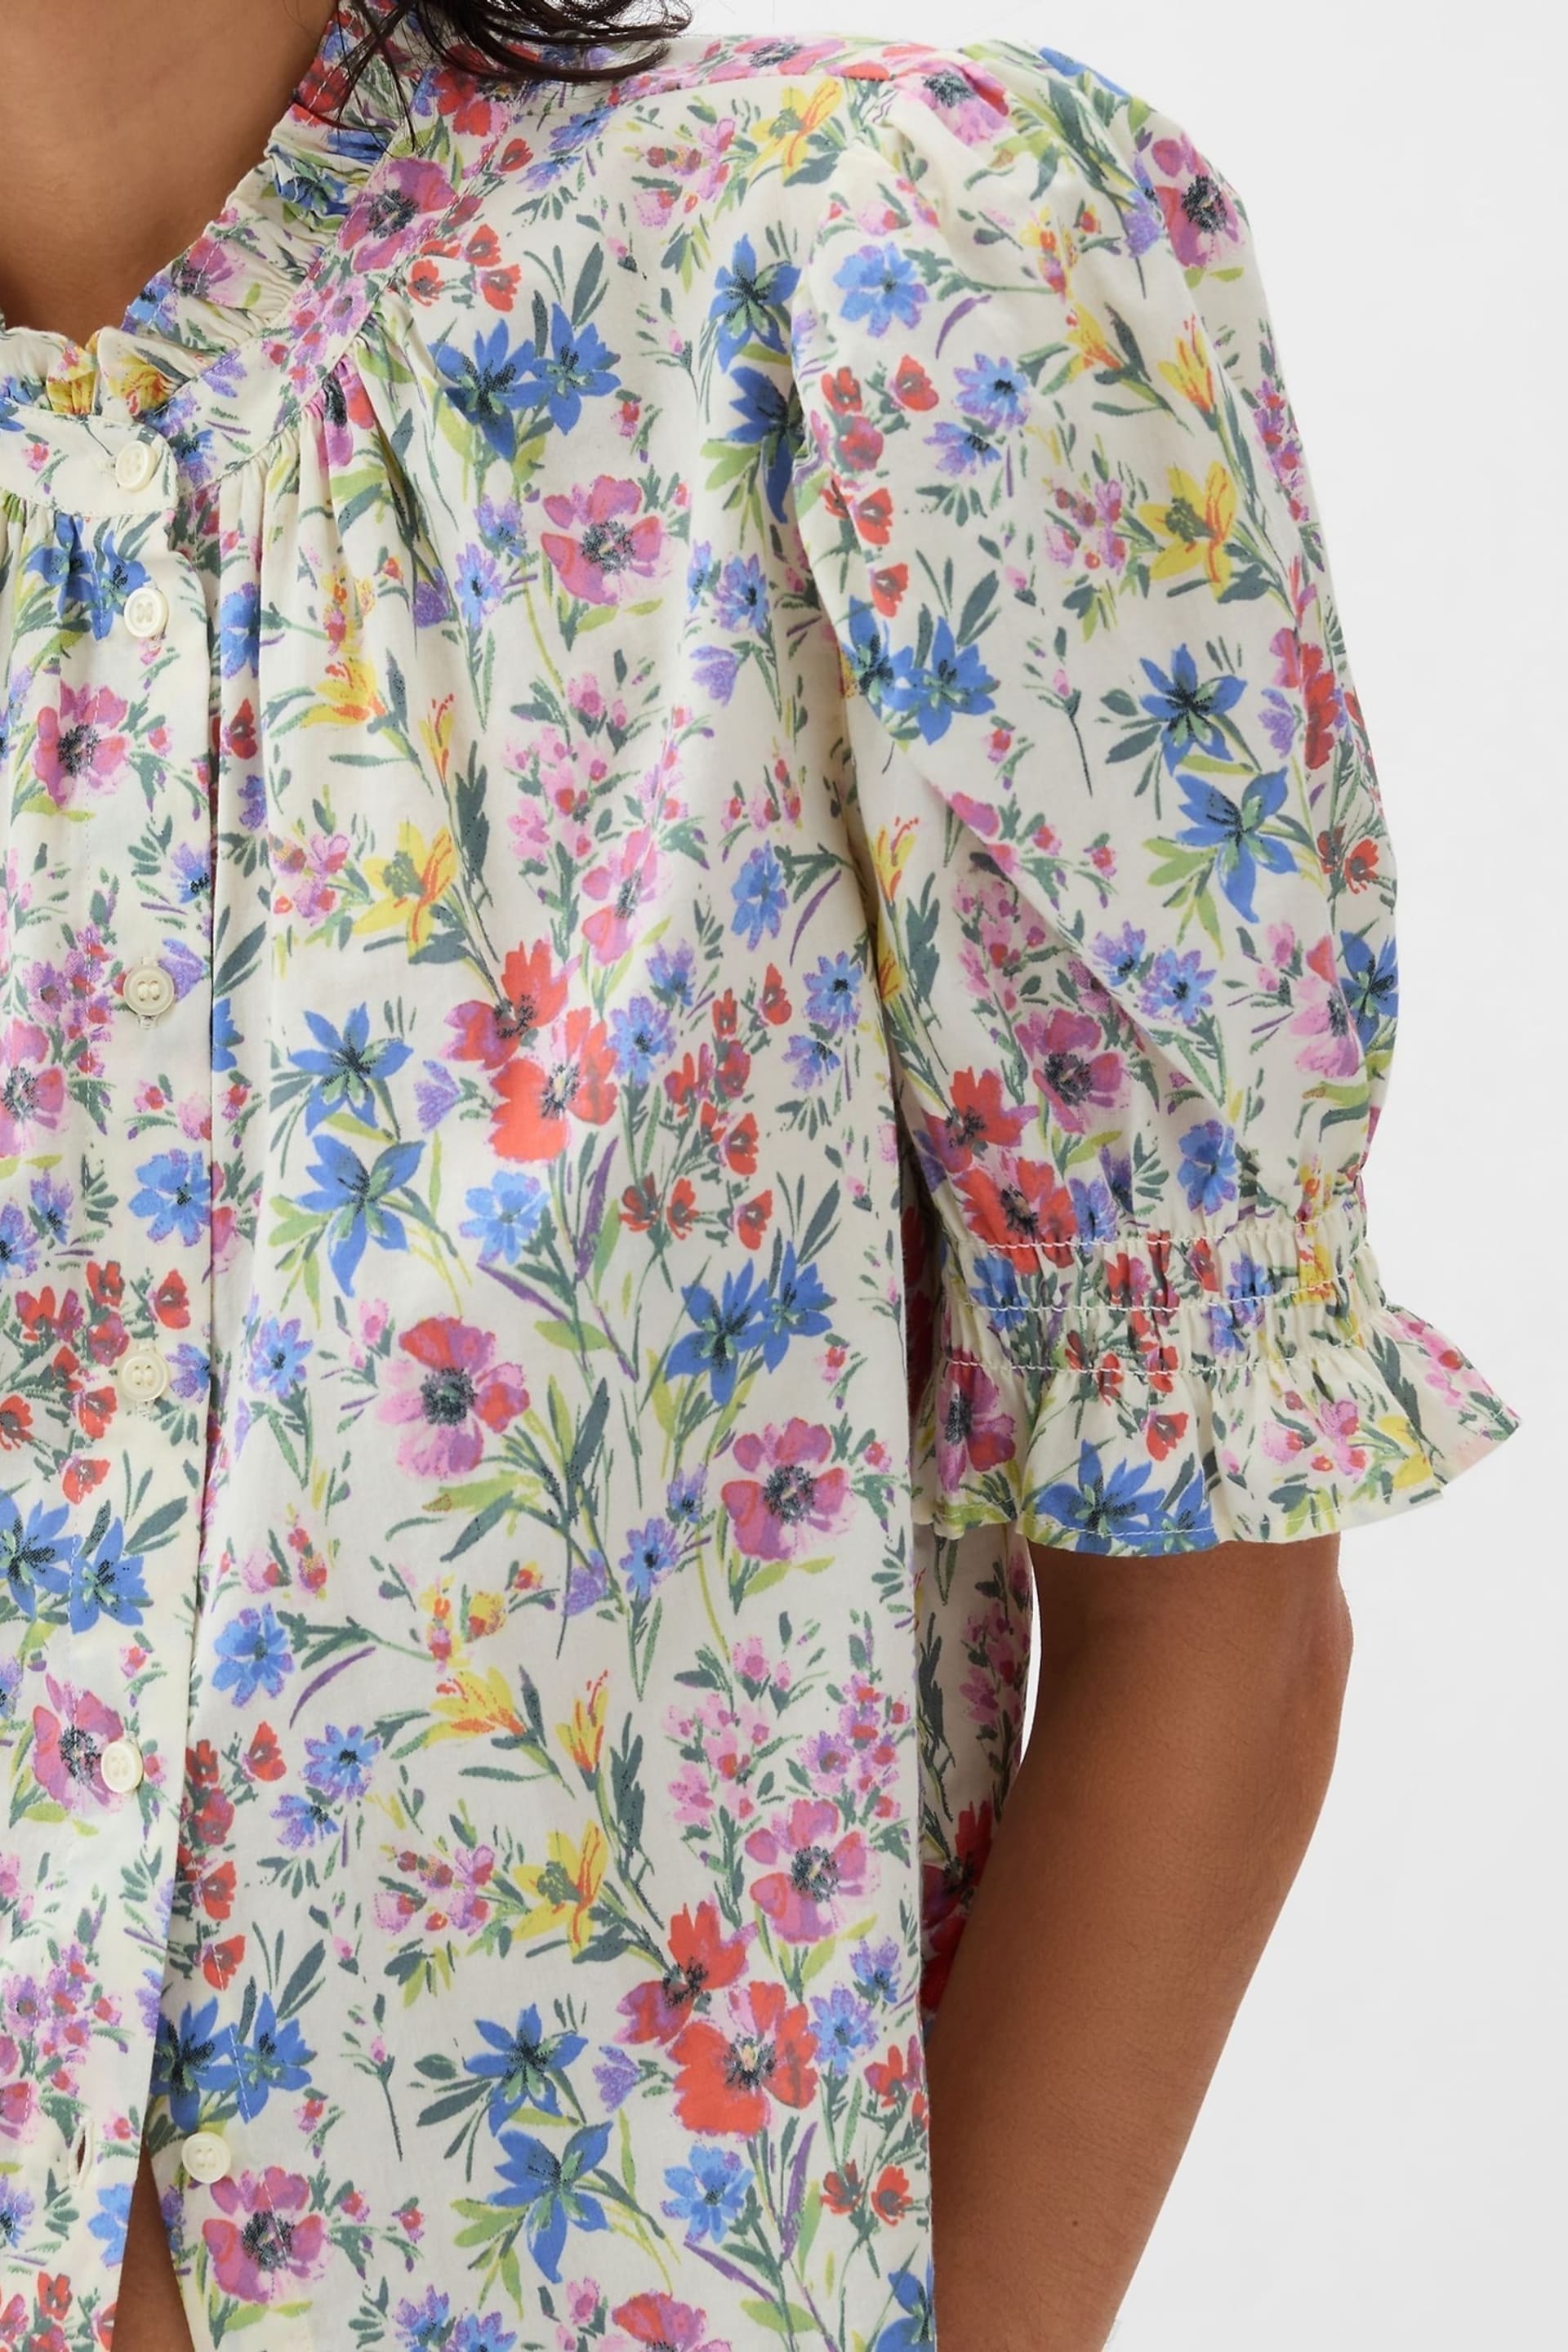 Gap White Floral High Neck Puff Sleeve Button Shirt - Image 4 of 4